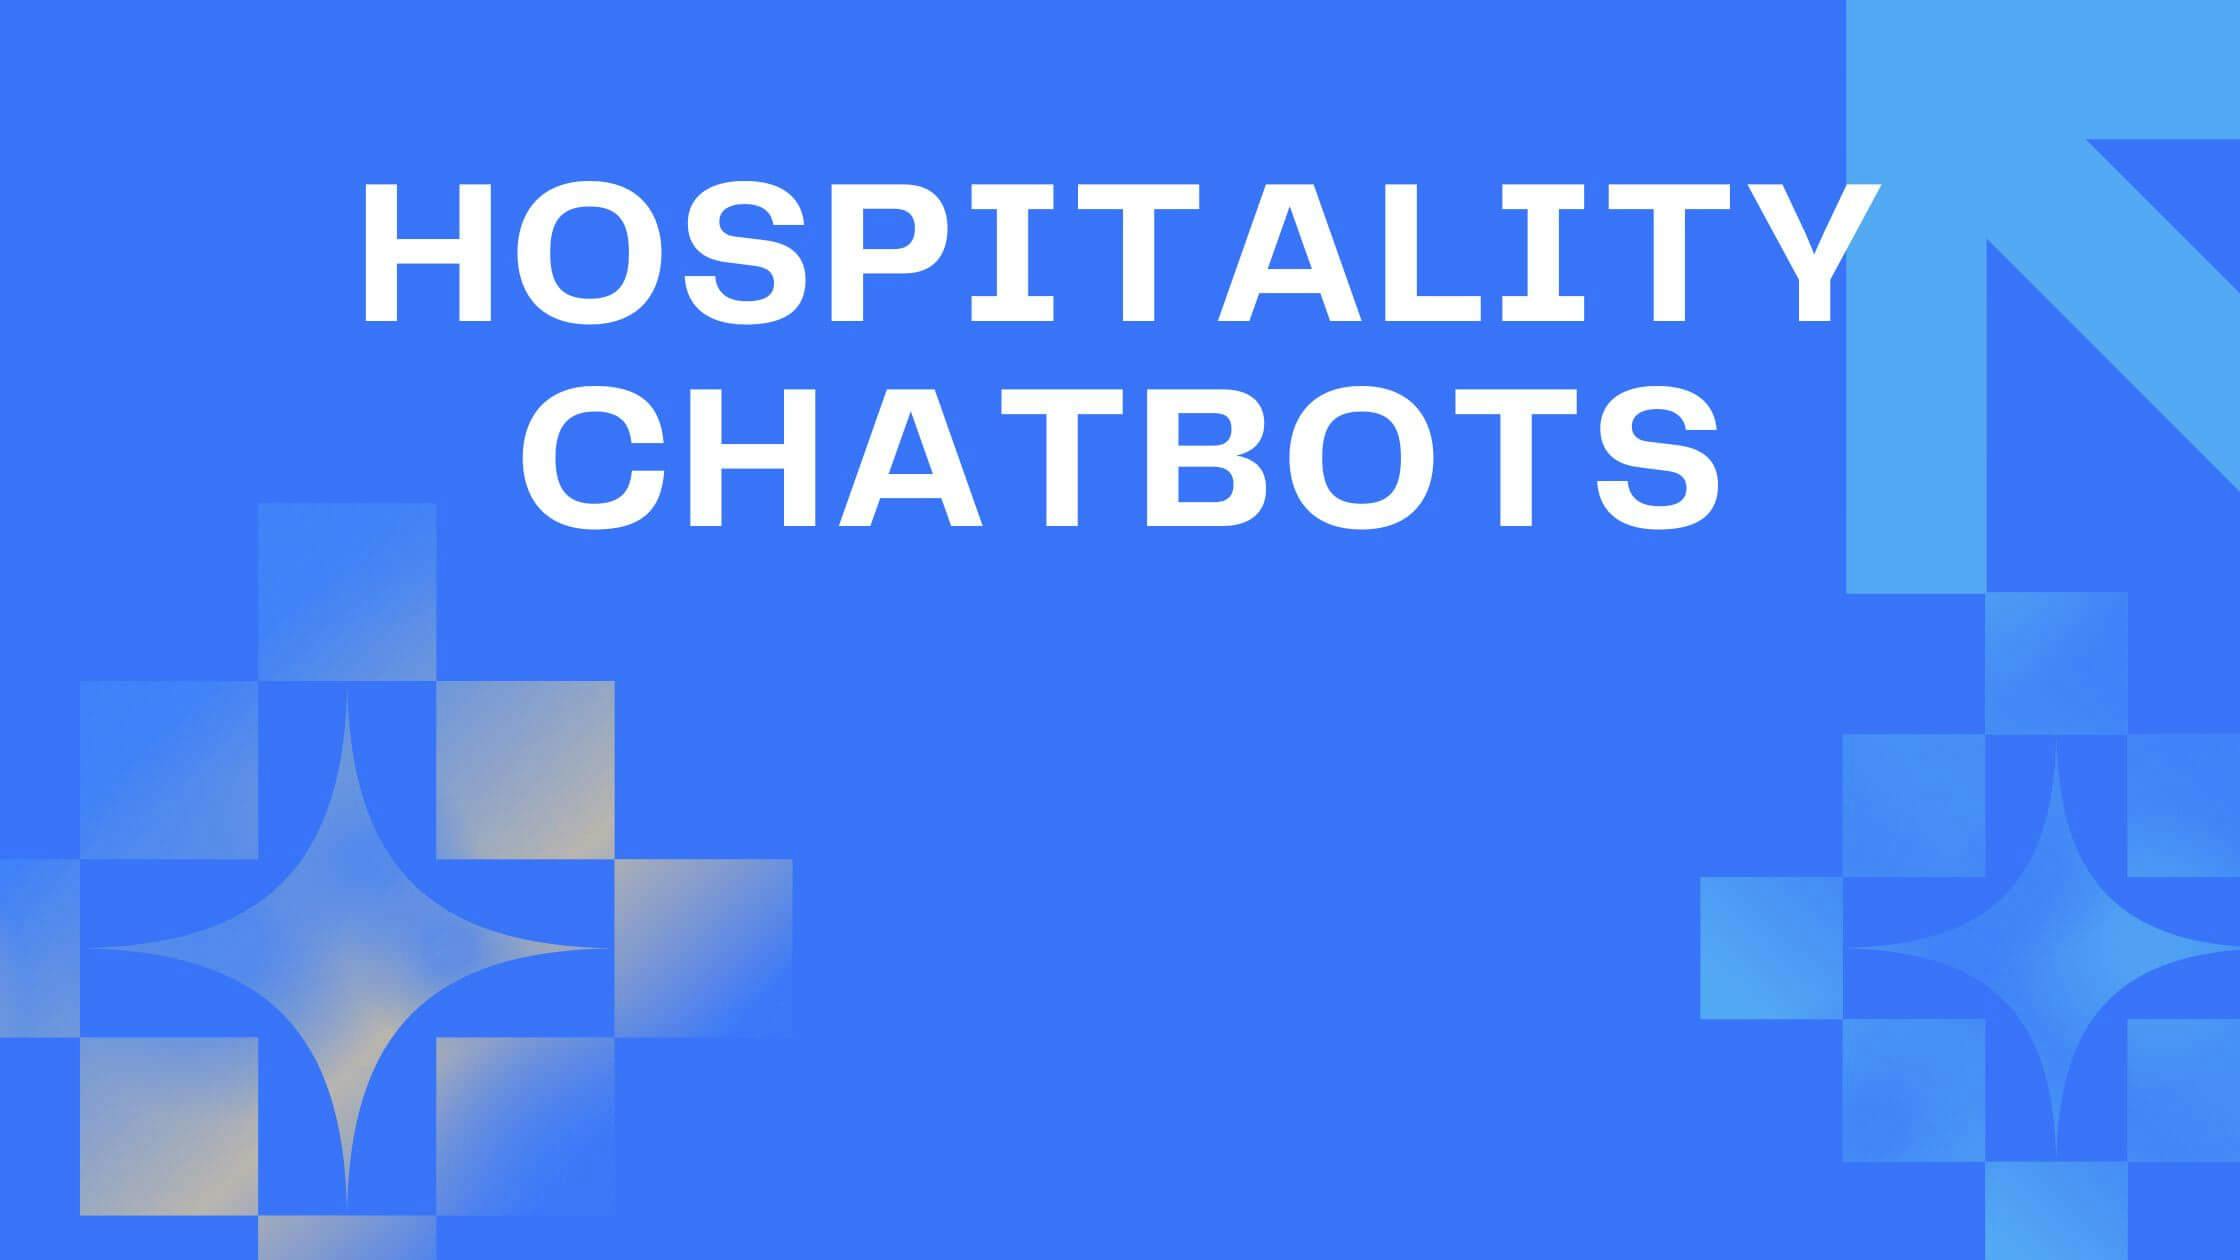 4 Best Hospitality Chatbots to Try